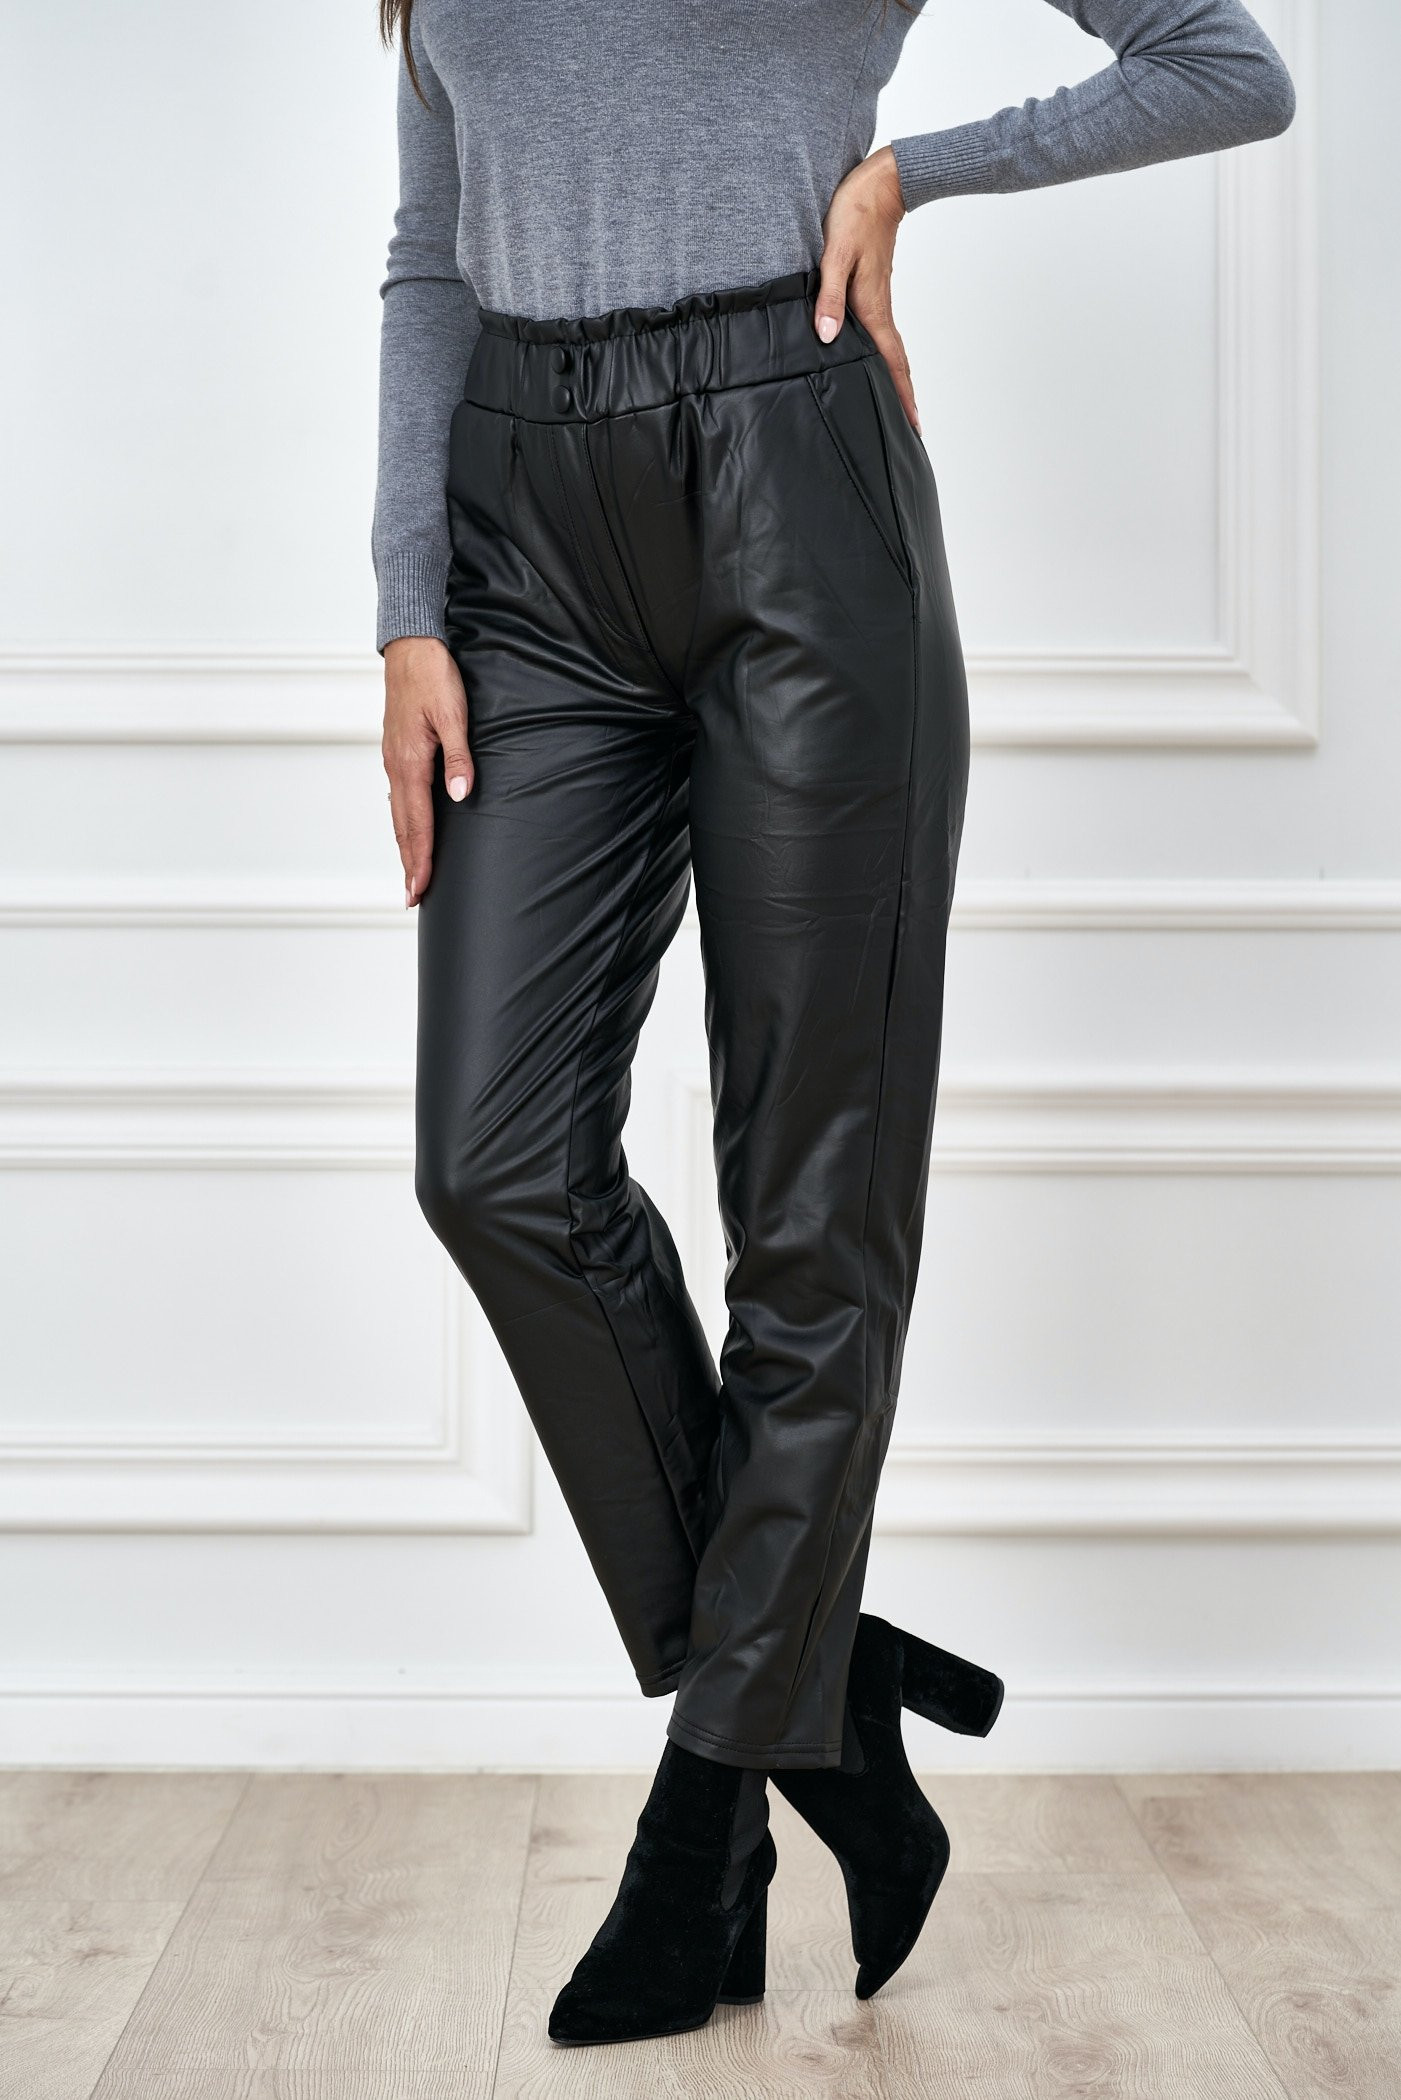 Business High Waist Jumper Trousers in Leather Look | eBay